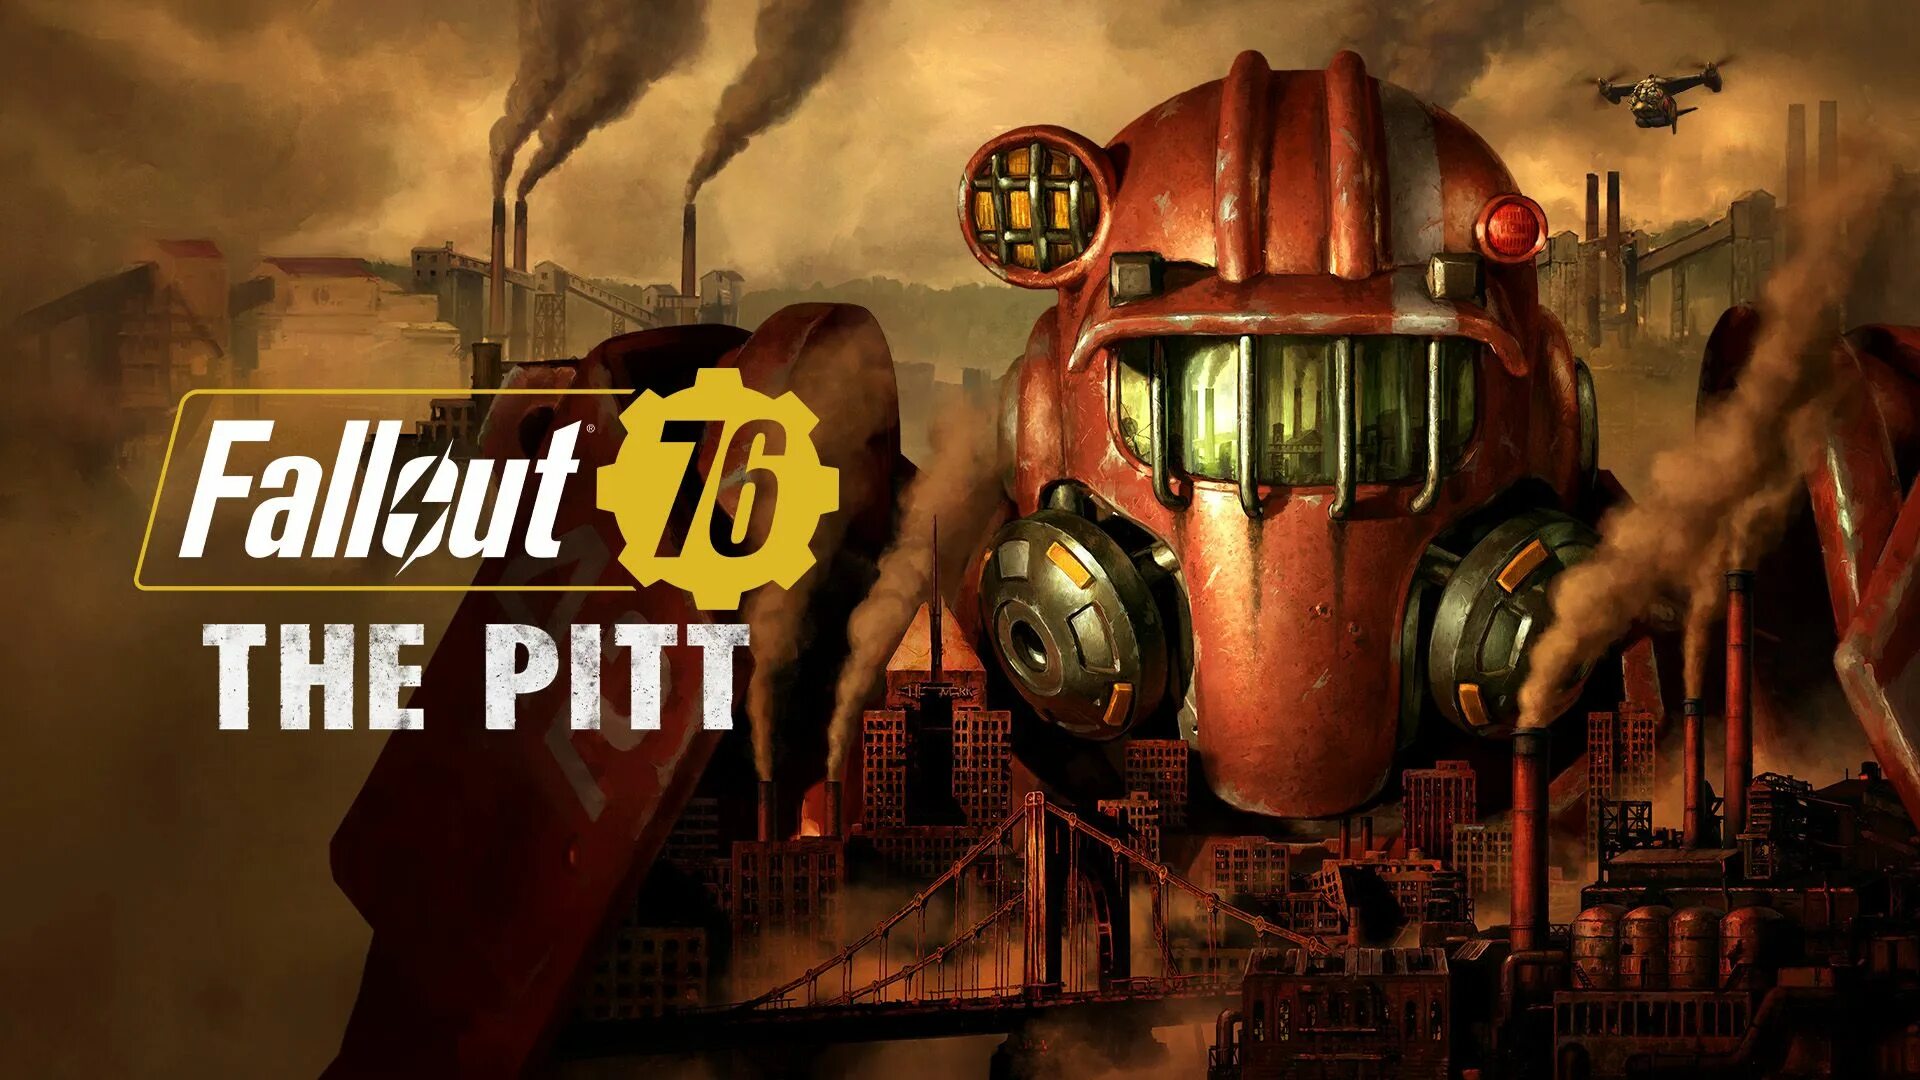 Питт фоллаут. Fallout 76 the Pitt. Fallout 76 the Pitt Deluxe. Фоллаут 3 the Pitt.